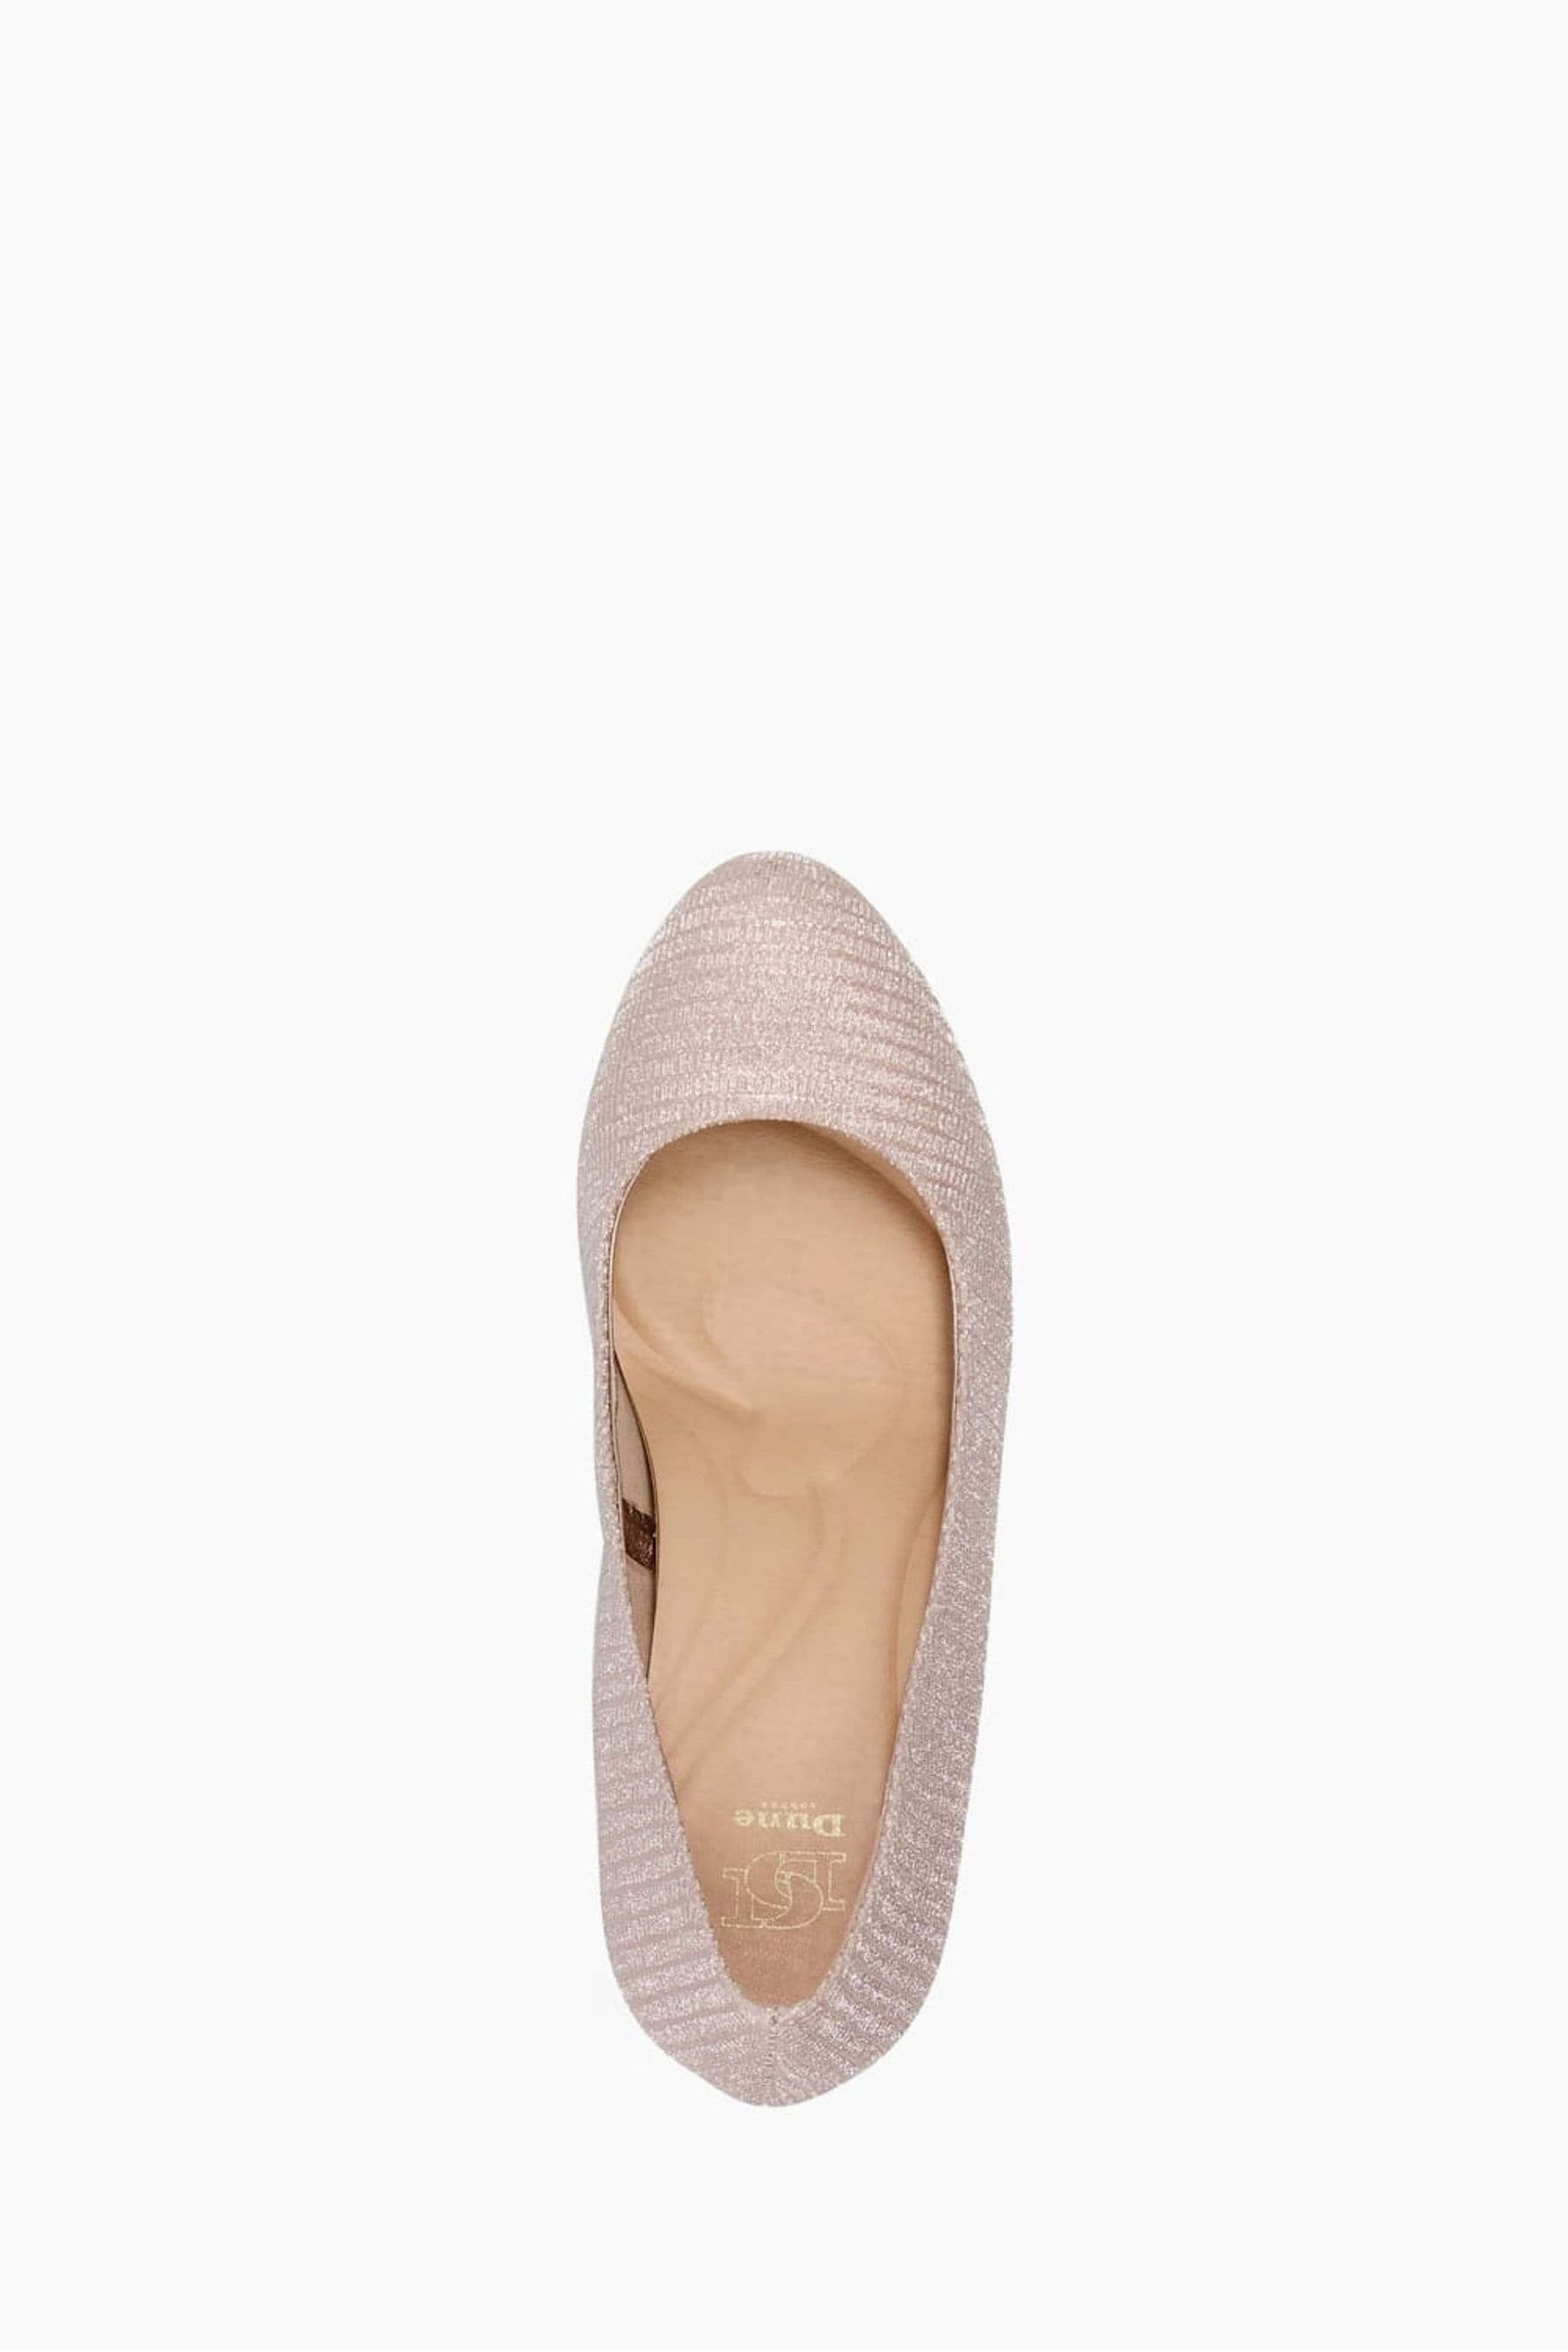 Buy Dune London Annibell Wedge Heel Court Shoes from the Next UK online ...